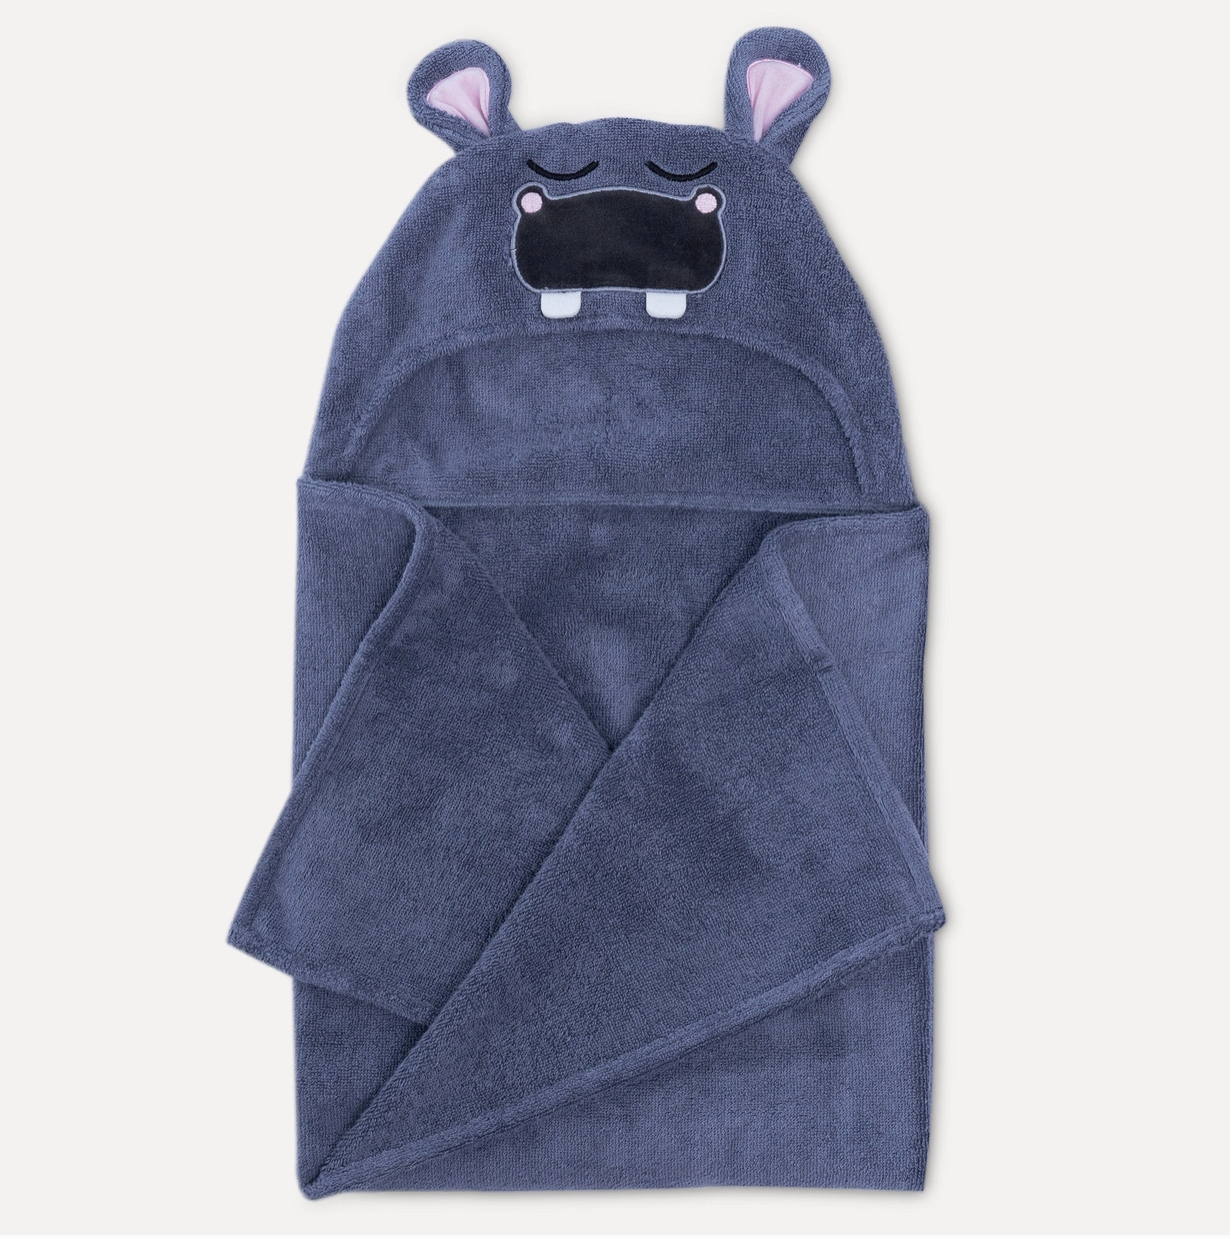 Bamboo Hippo Hooded Towel For Kids